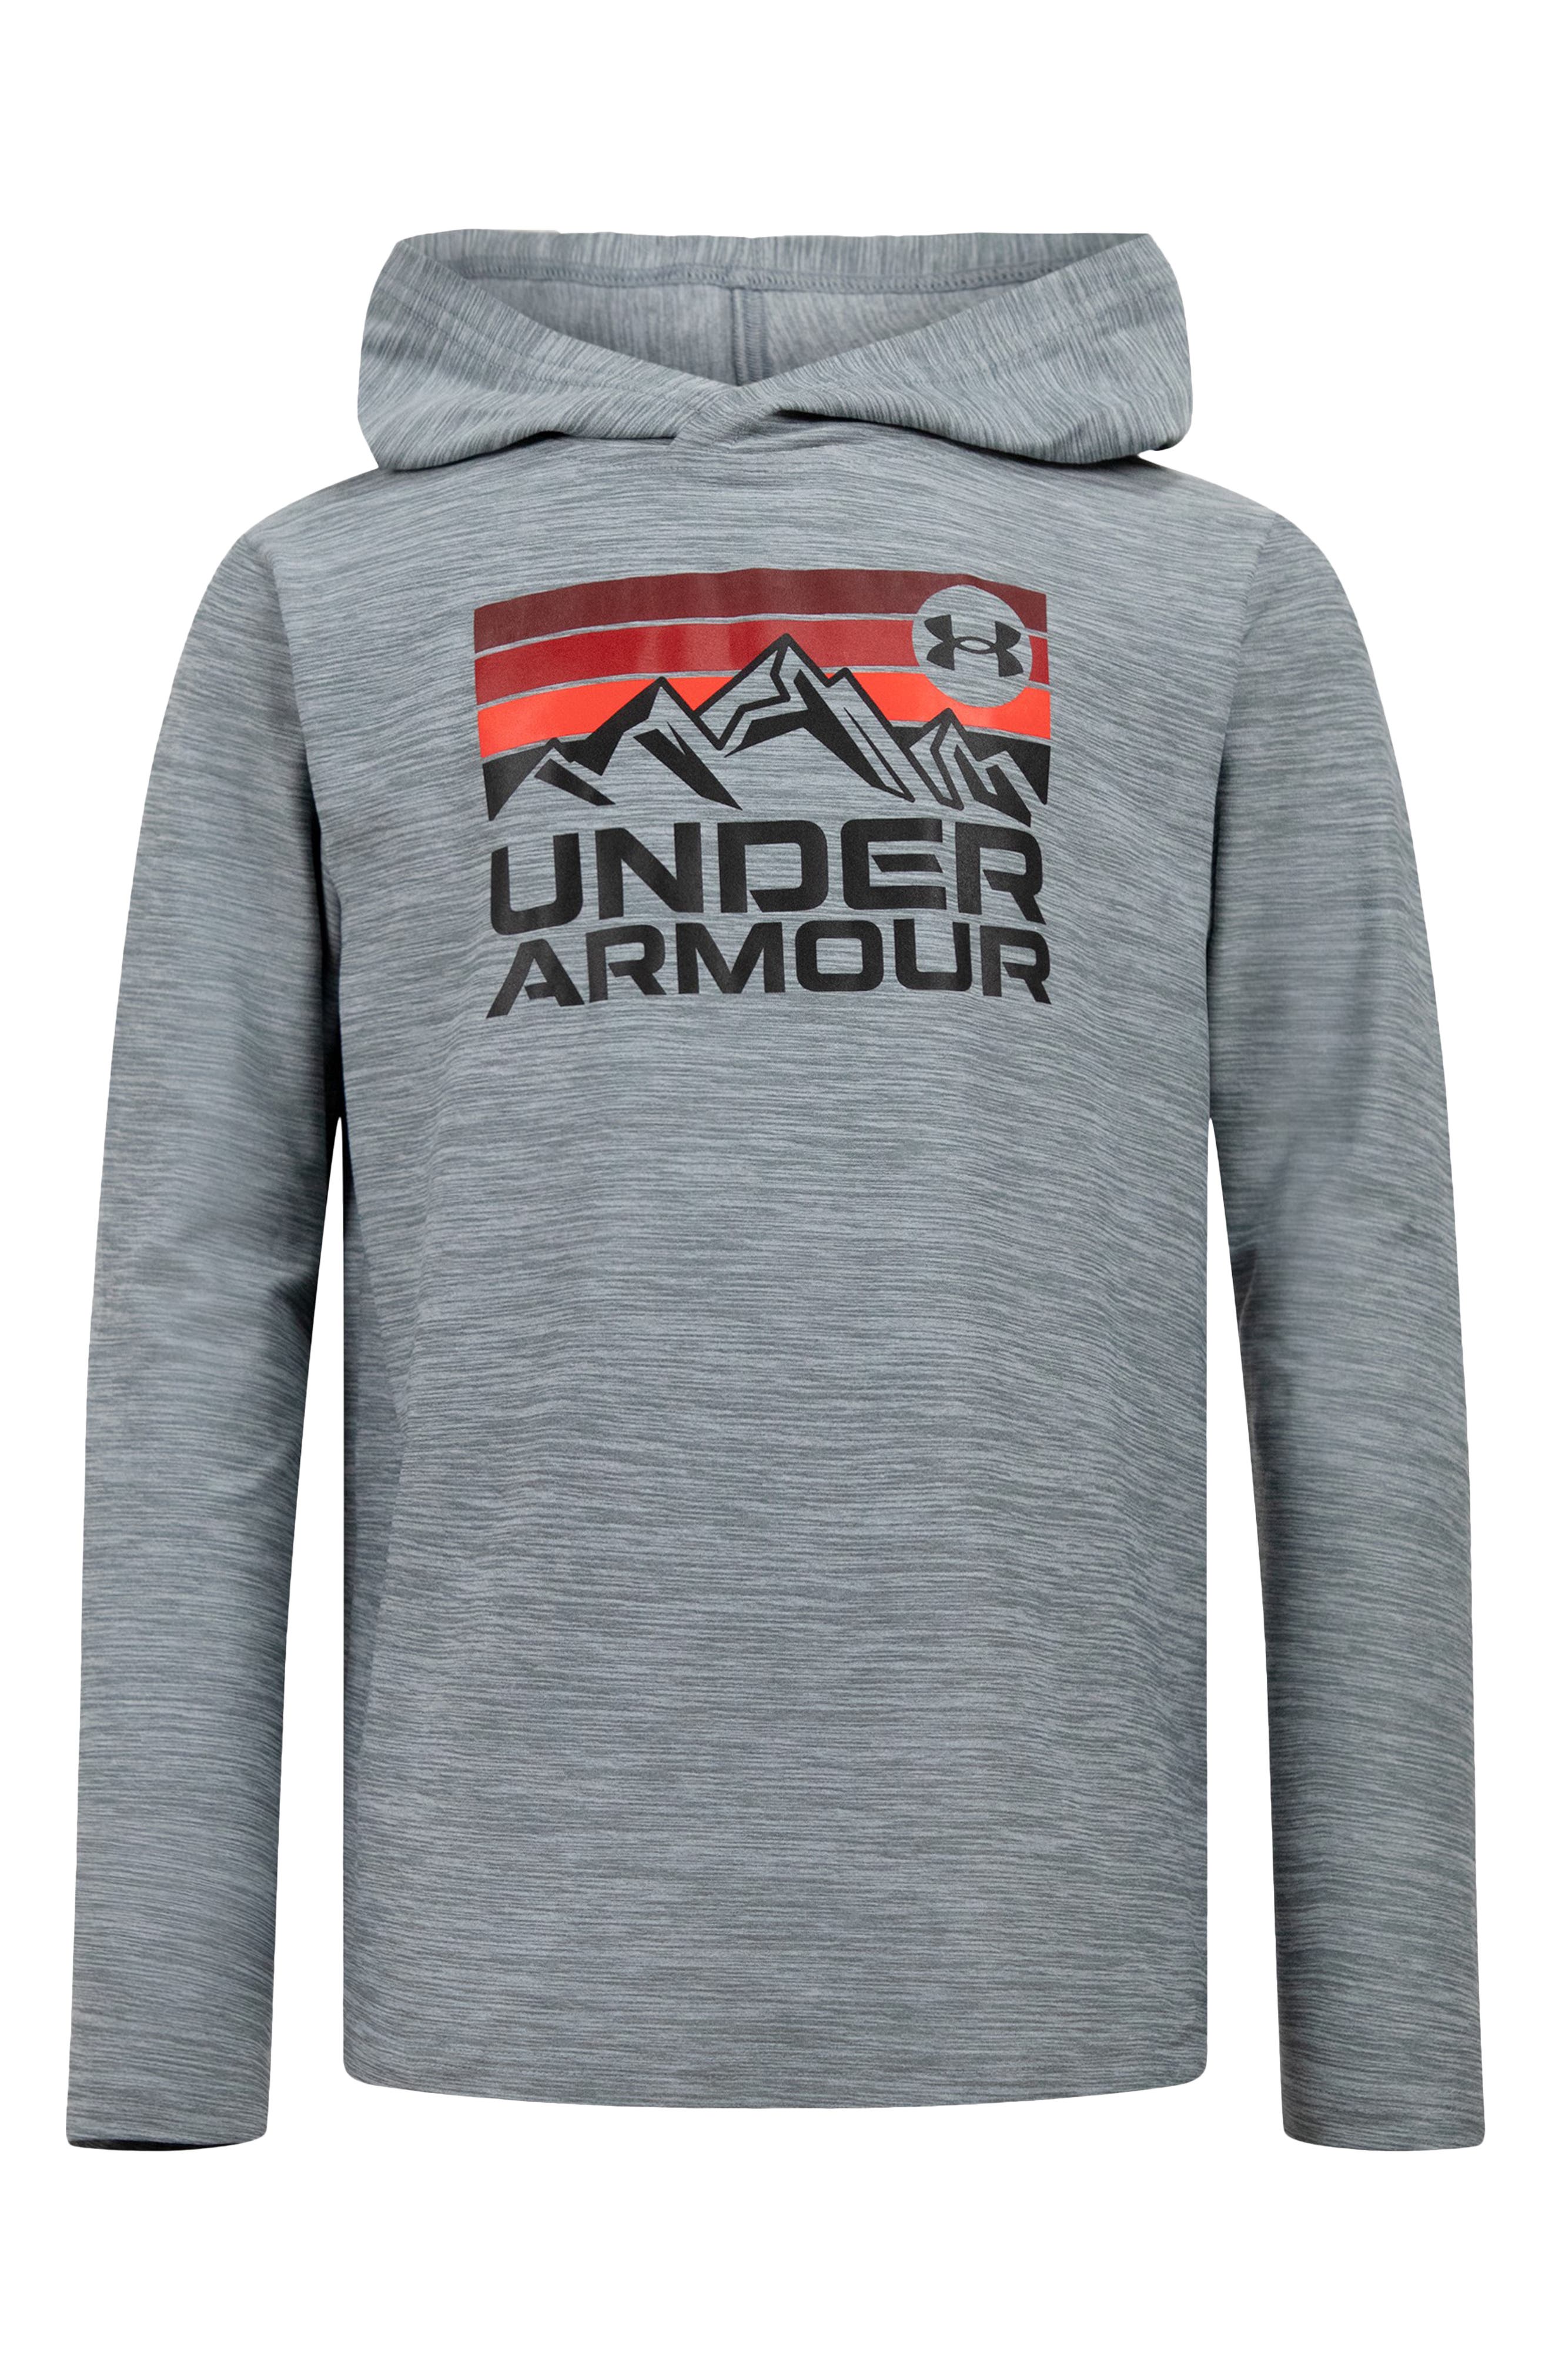 XLrg 18-20 New Girls Under Armour Cozy Hooded Jacket Sm 7-8 Full-Zip; Gray 